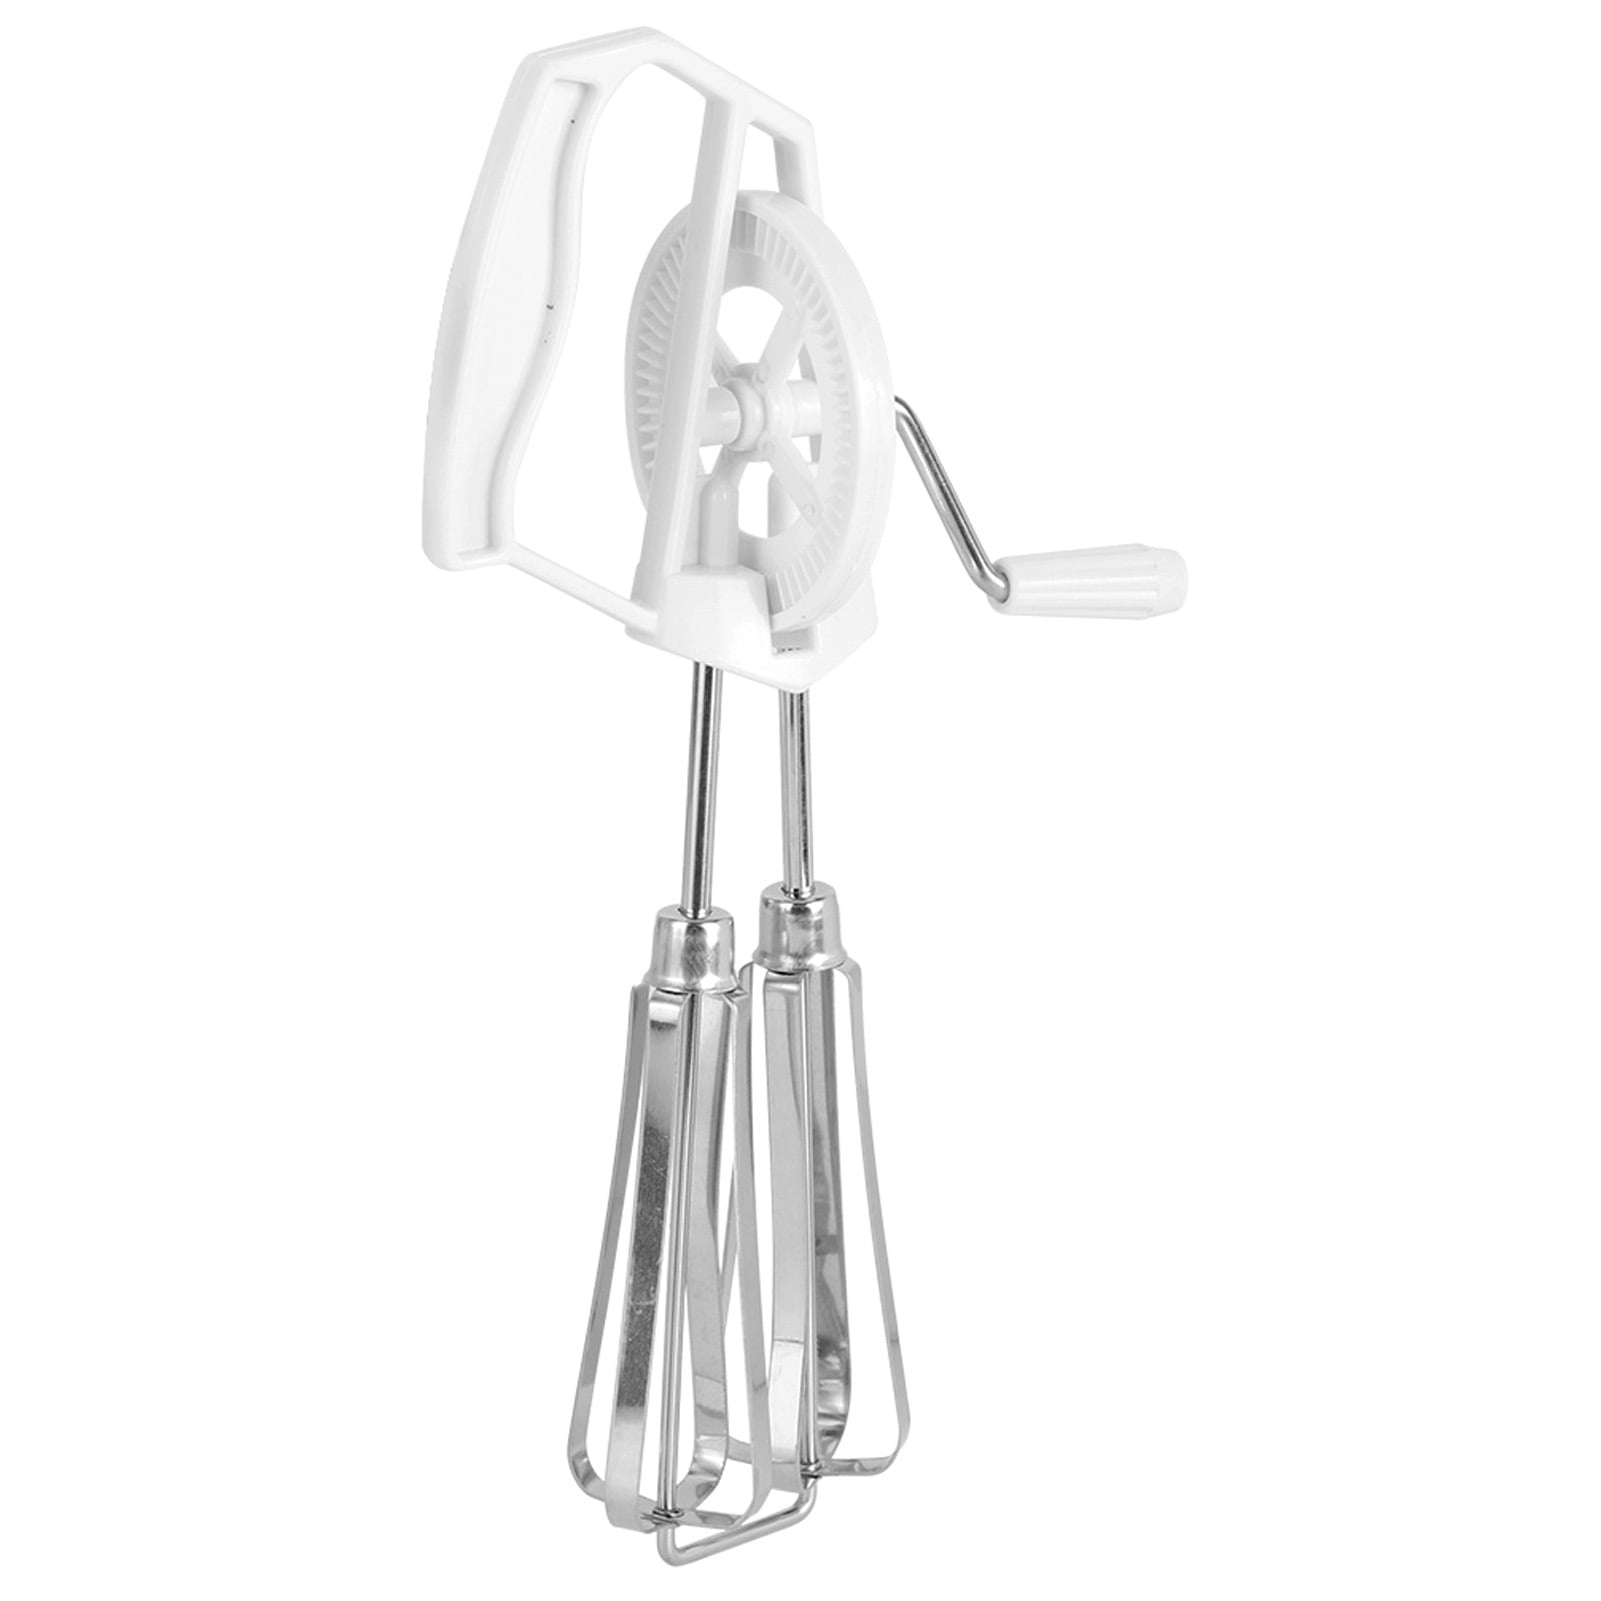 Manual Hand Mixer Easy Operation Stainless Steel Hand Crank Auto